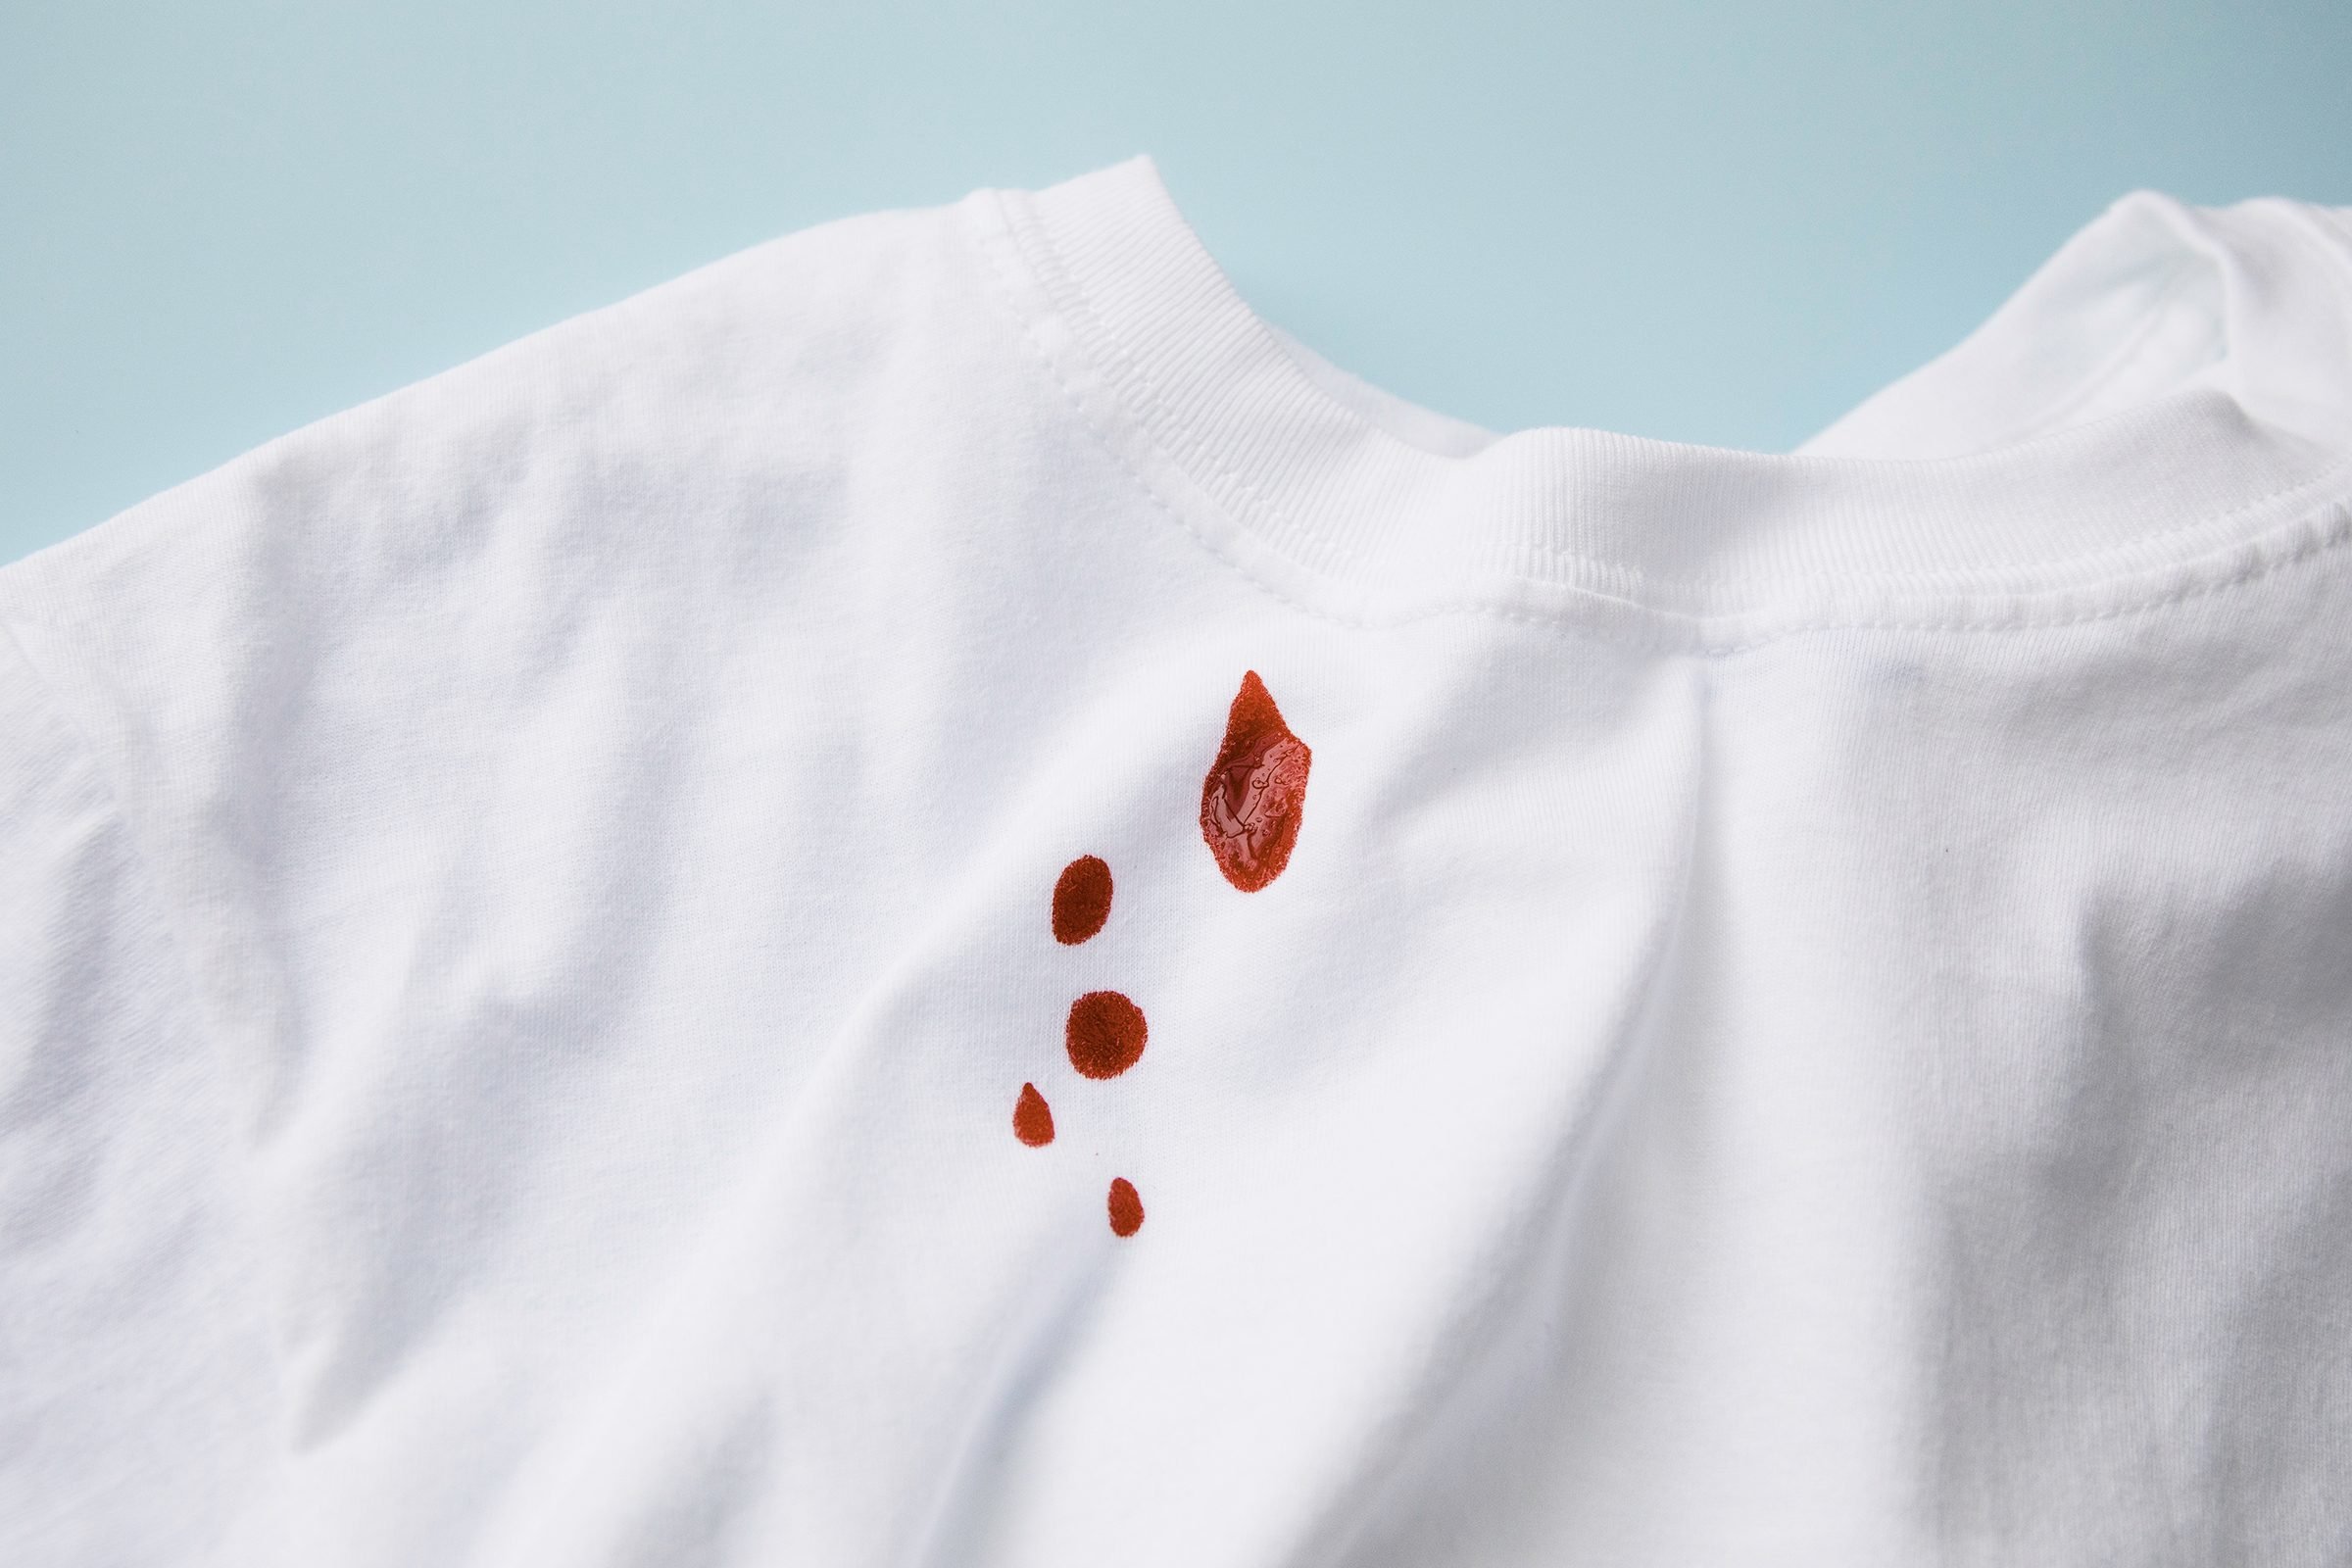 How to Get Fresh Blood out of Clothes